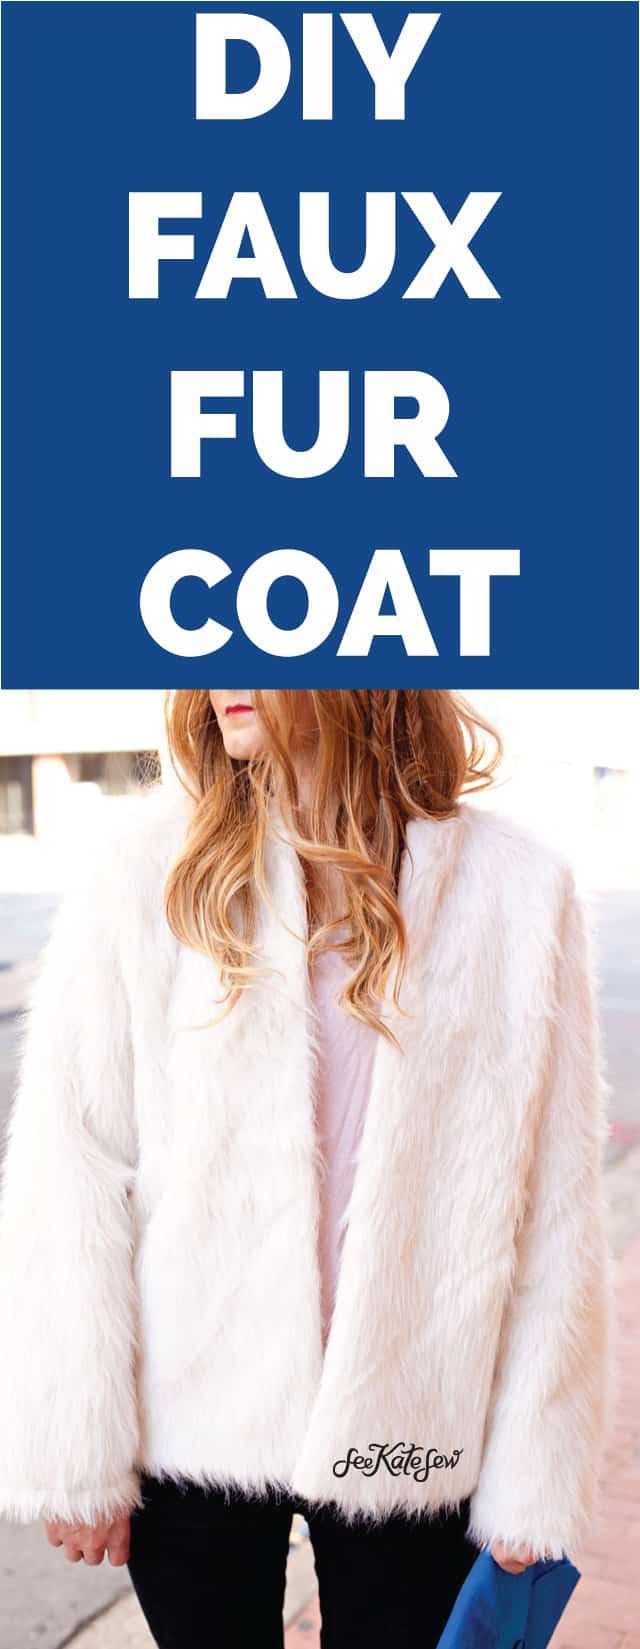 DIY oversized faur fur coat | how to sew a faux fur coat | diy sewing projects | diy clothing | easy sewing tutorial | free sewing pattern || See Kate Sew #freesewingpattern #fauxfurcoat #handmadecoat